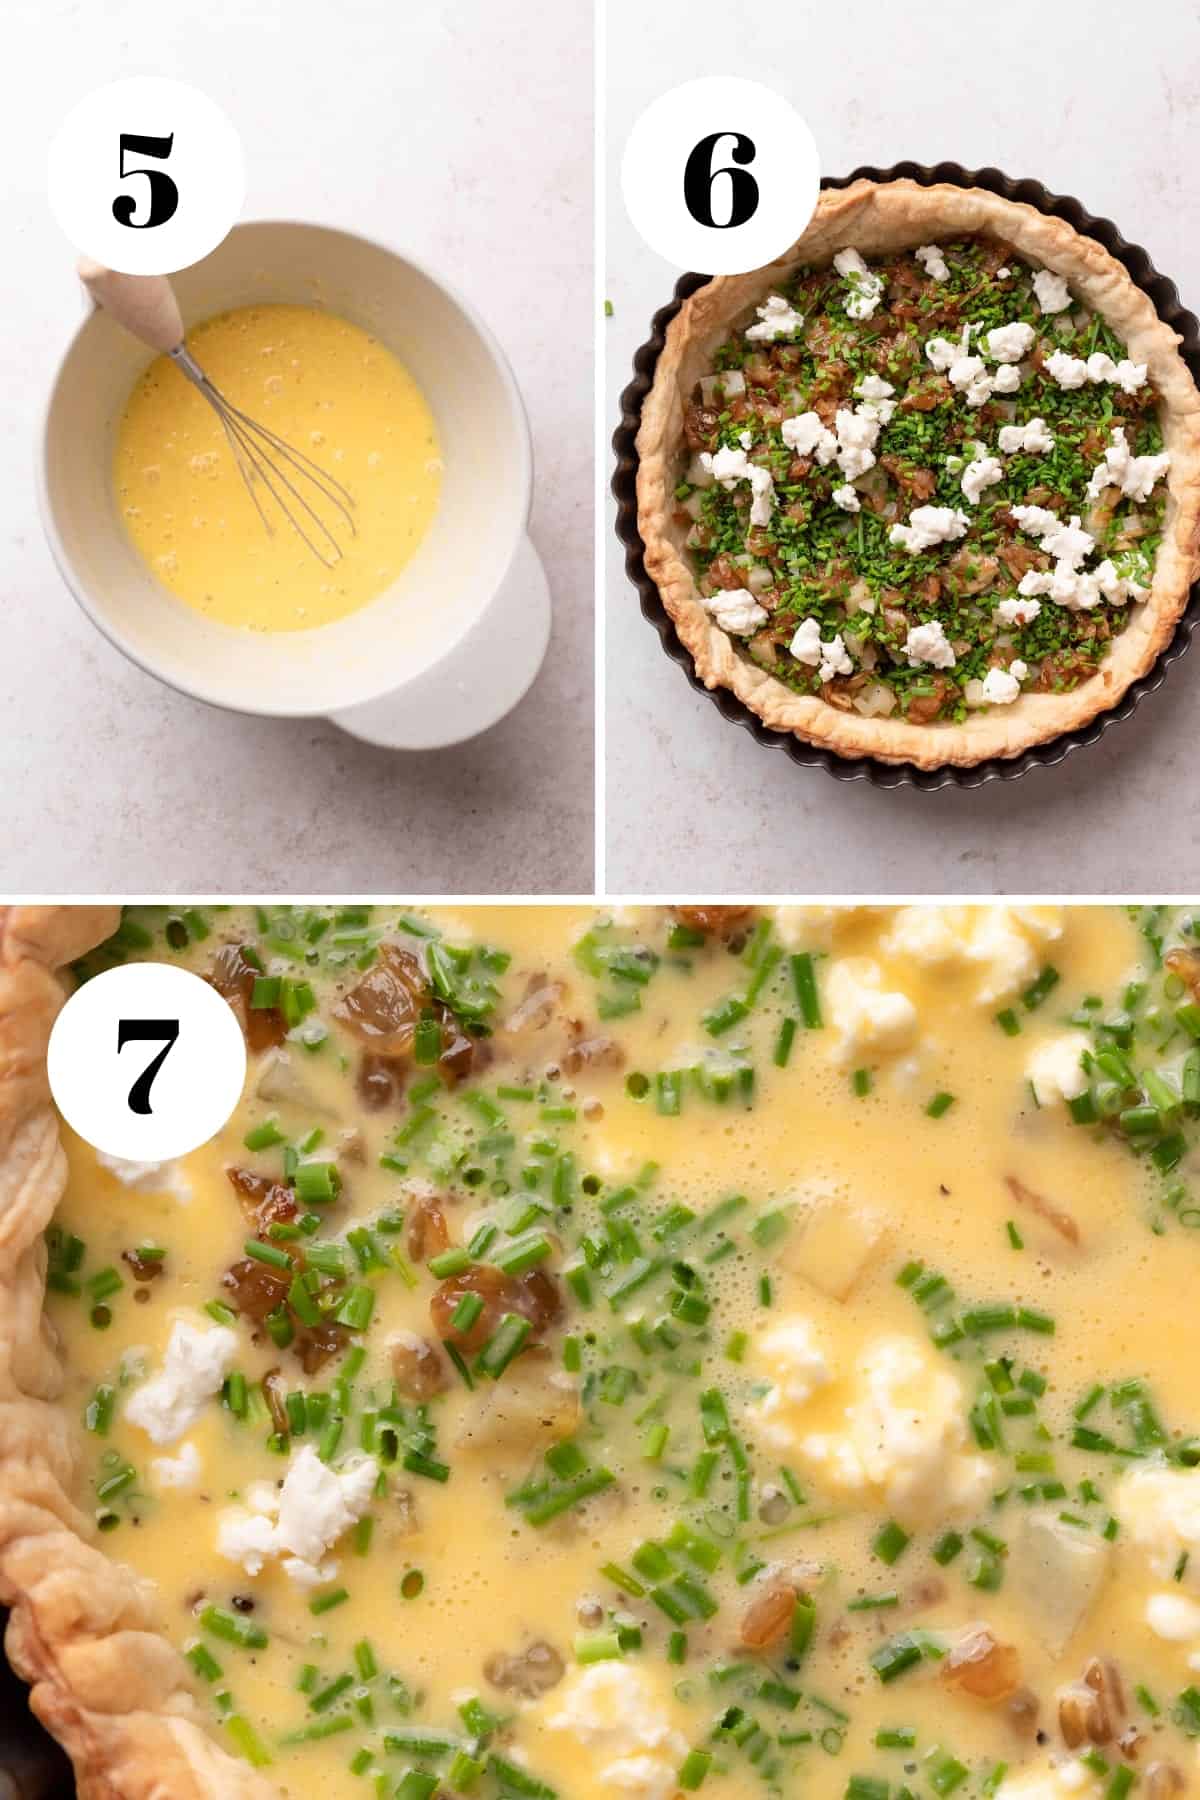 a process collage of the steps for making quiche.